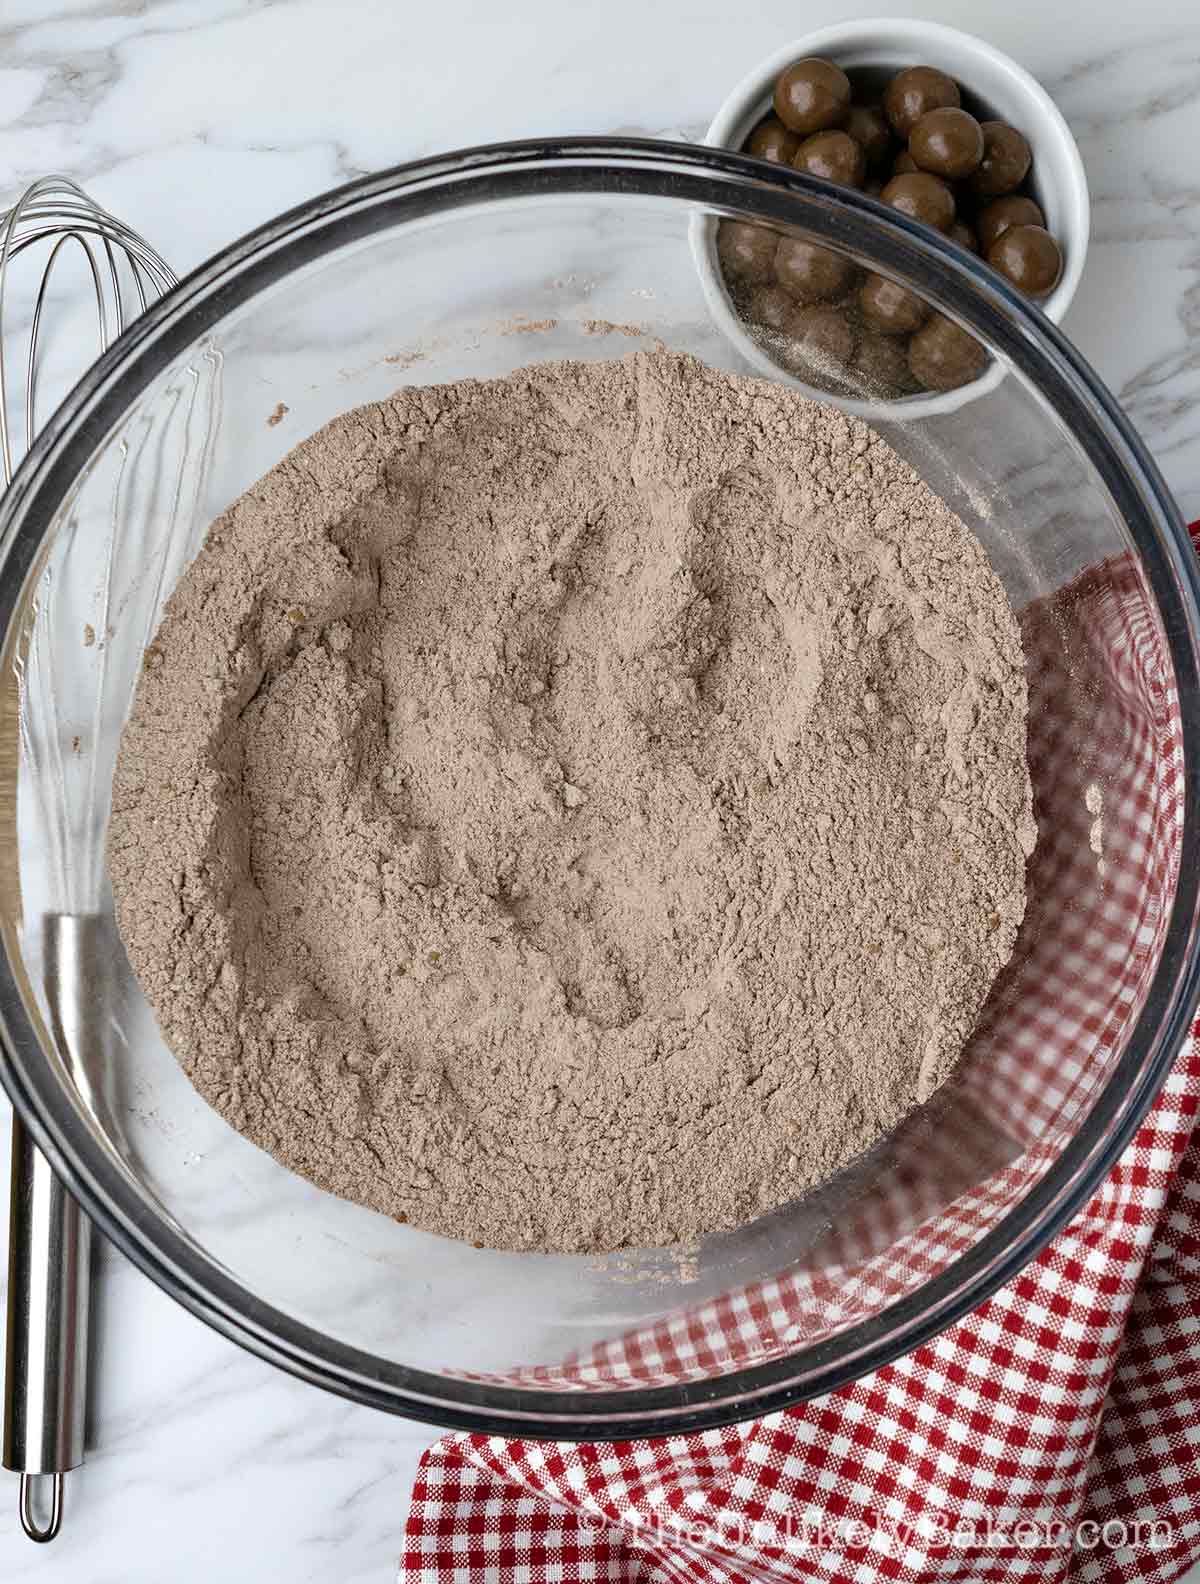 Flour mixture with malted chocolate powder in a bowl.